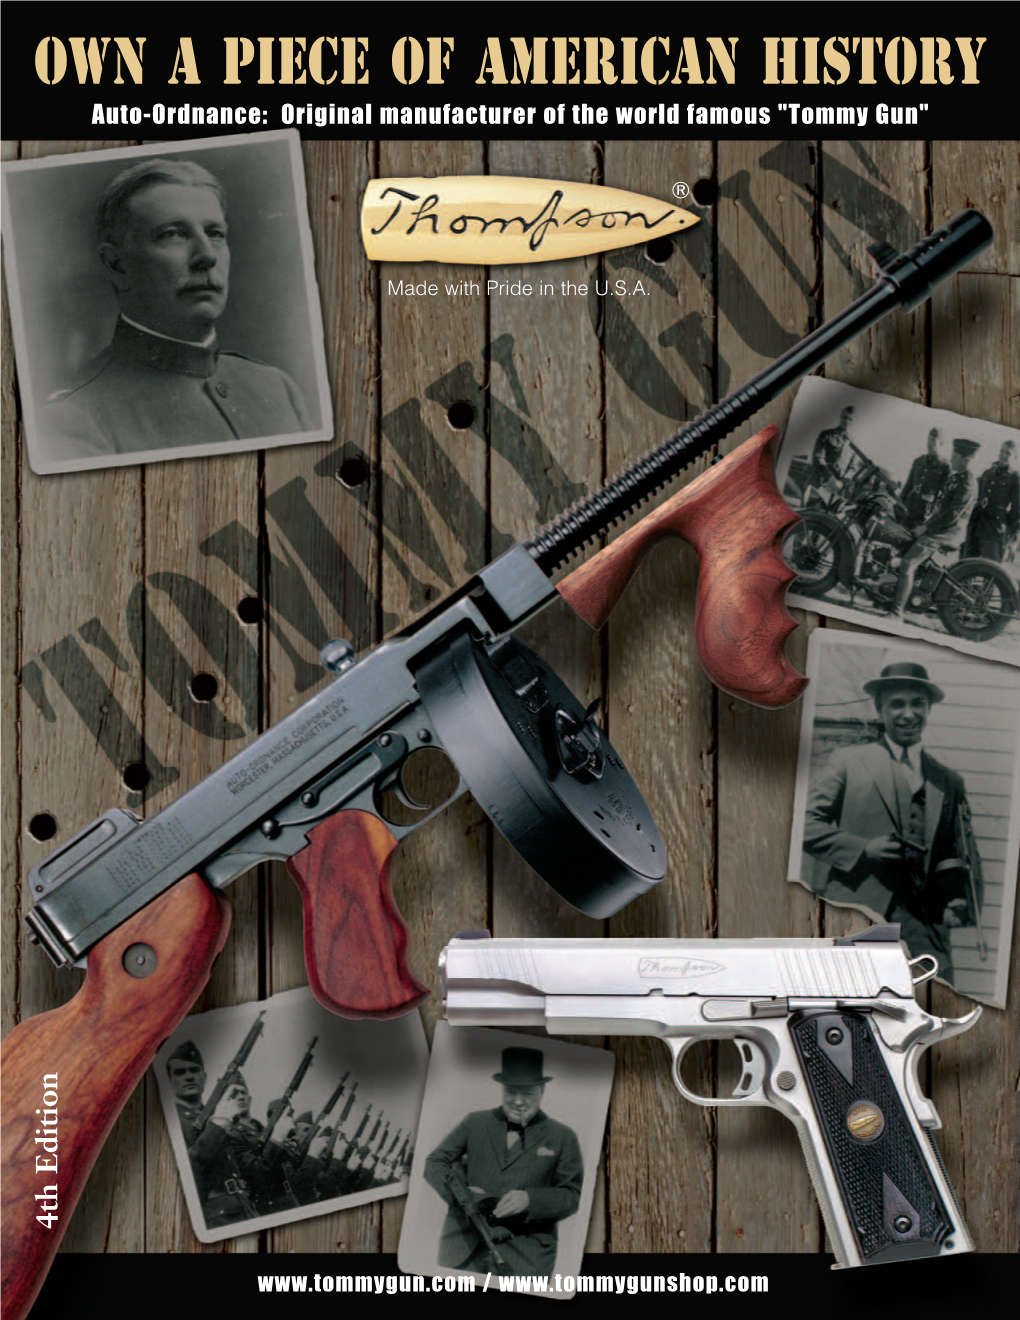 OWN a PIECE of AMERICAN HISTORY Auto-Ordnance: Original Manufacturer of the World Famous "Tommy Gun"